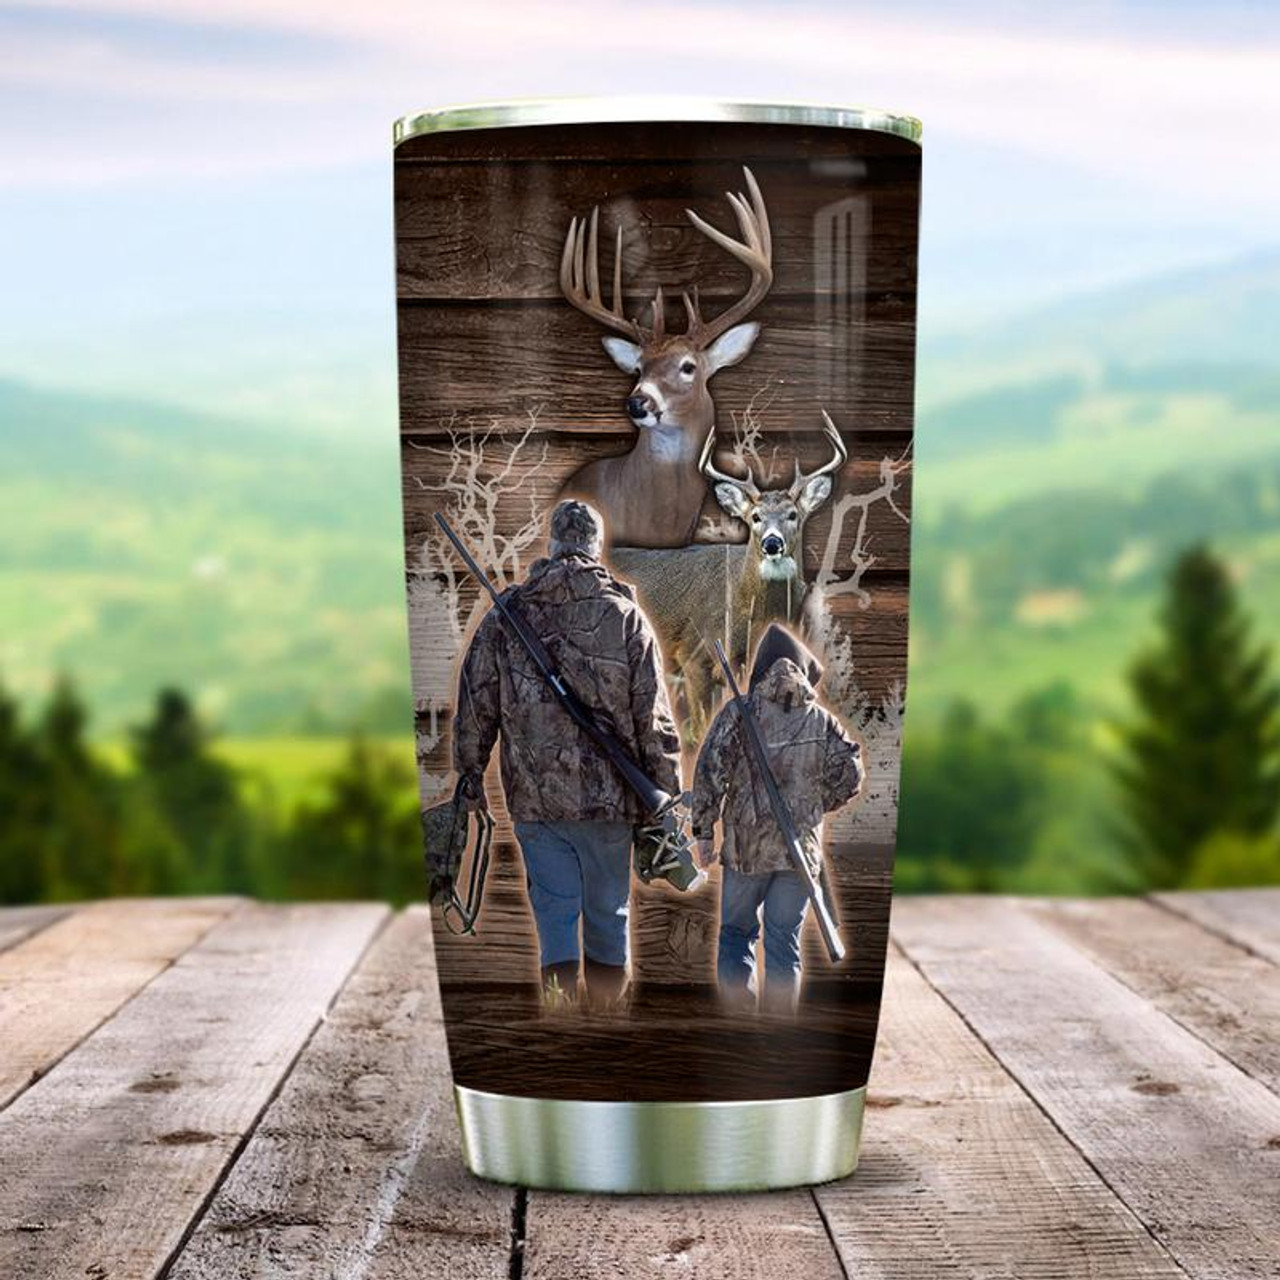 Hunting Gifts for Men - Stainless Steel Tumbler 20oz for Father - Best  Buckin Papa - Birthday Gifts for Men Dad Papa Husband - Christmas Gifts for  Dad